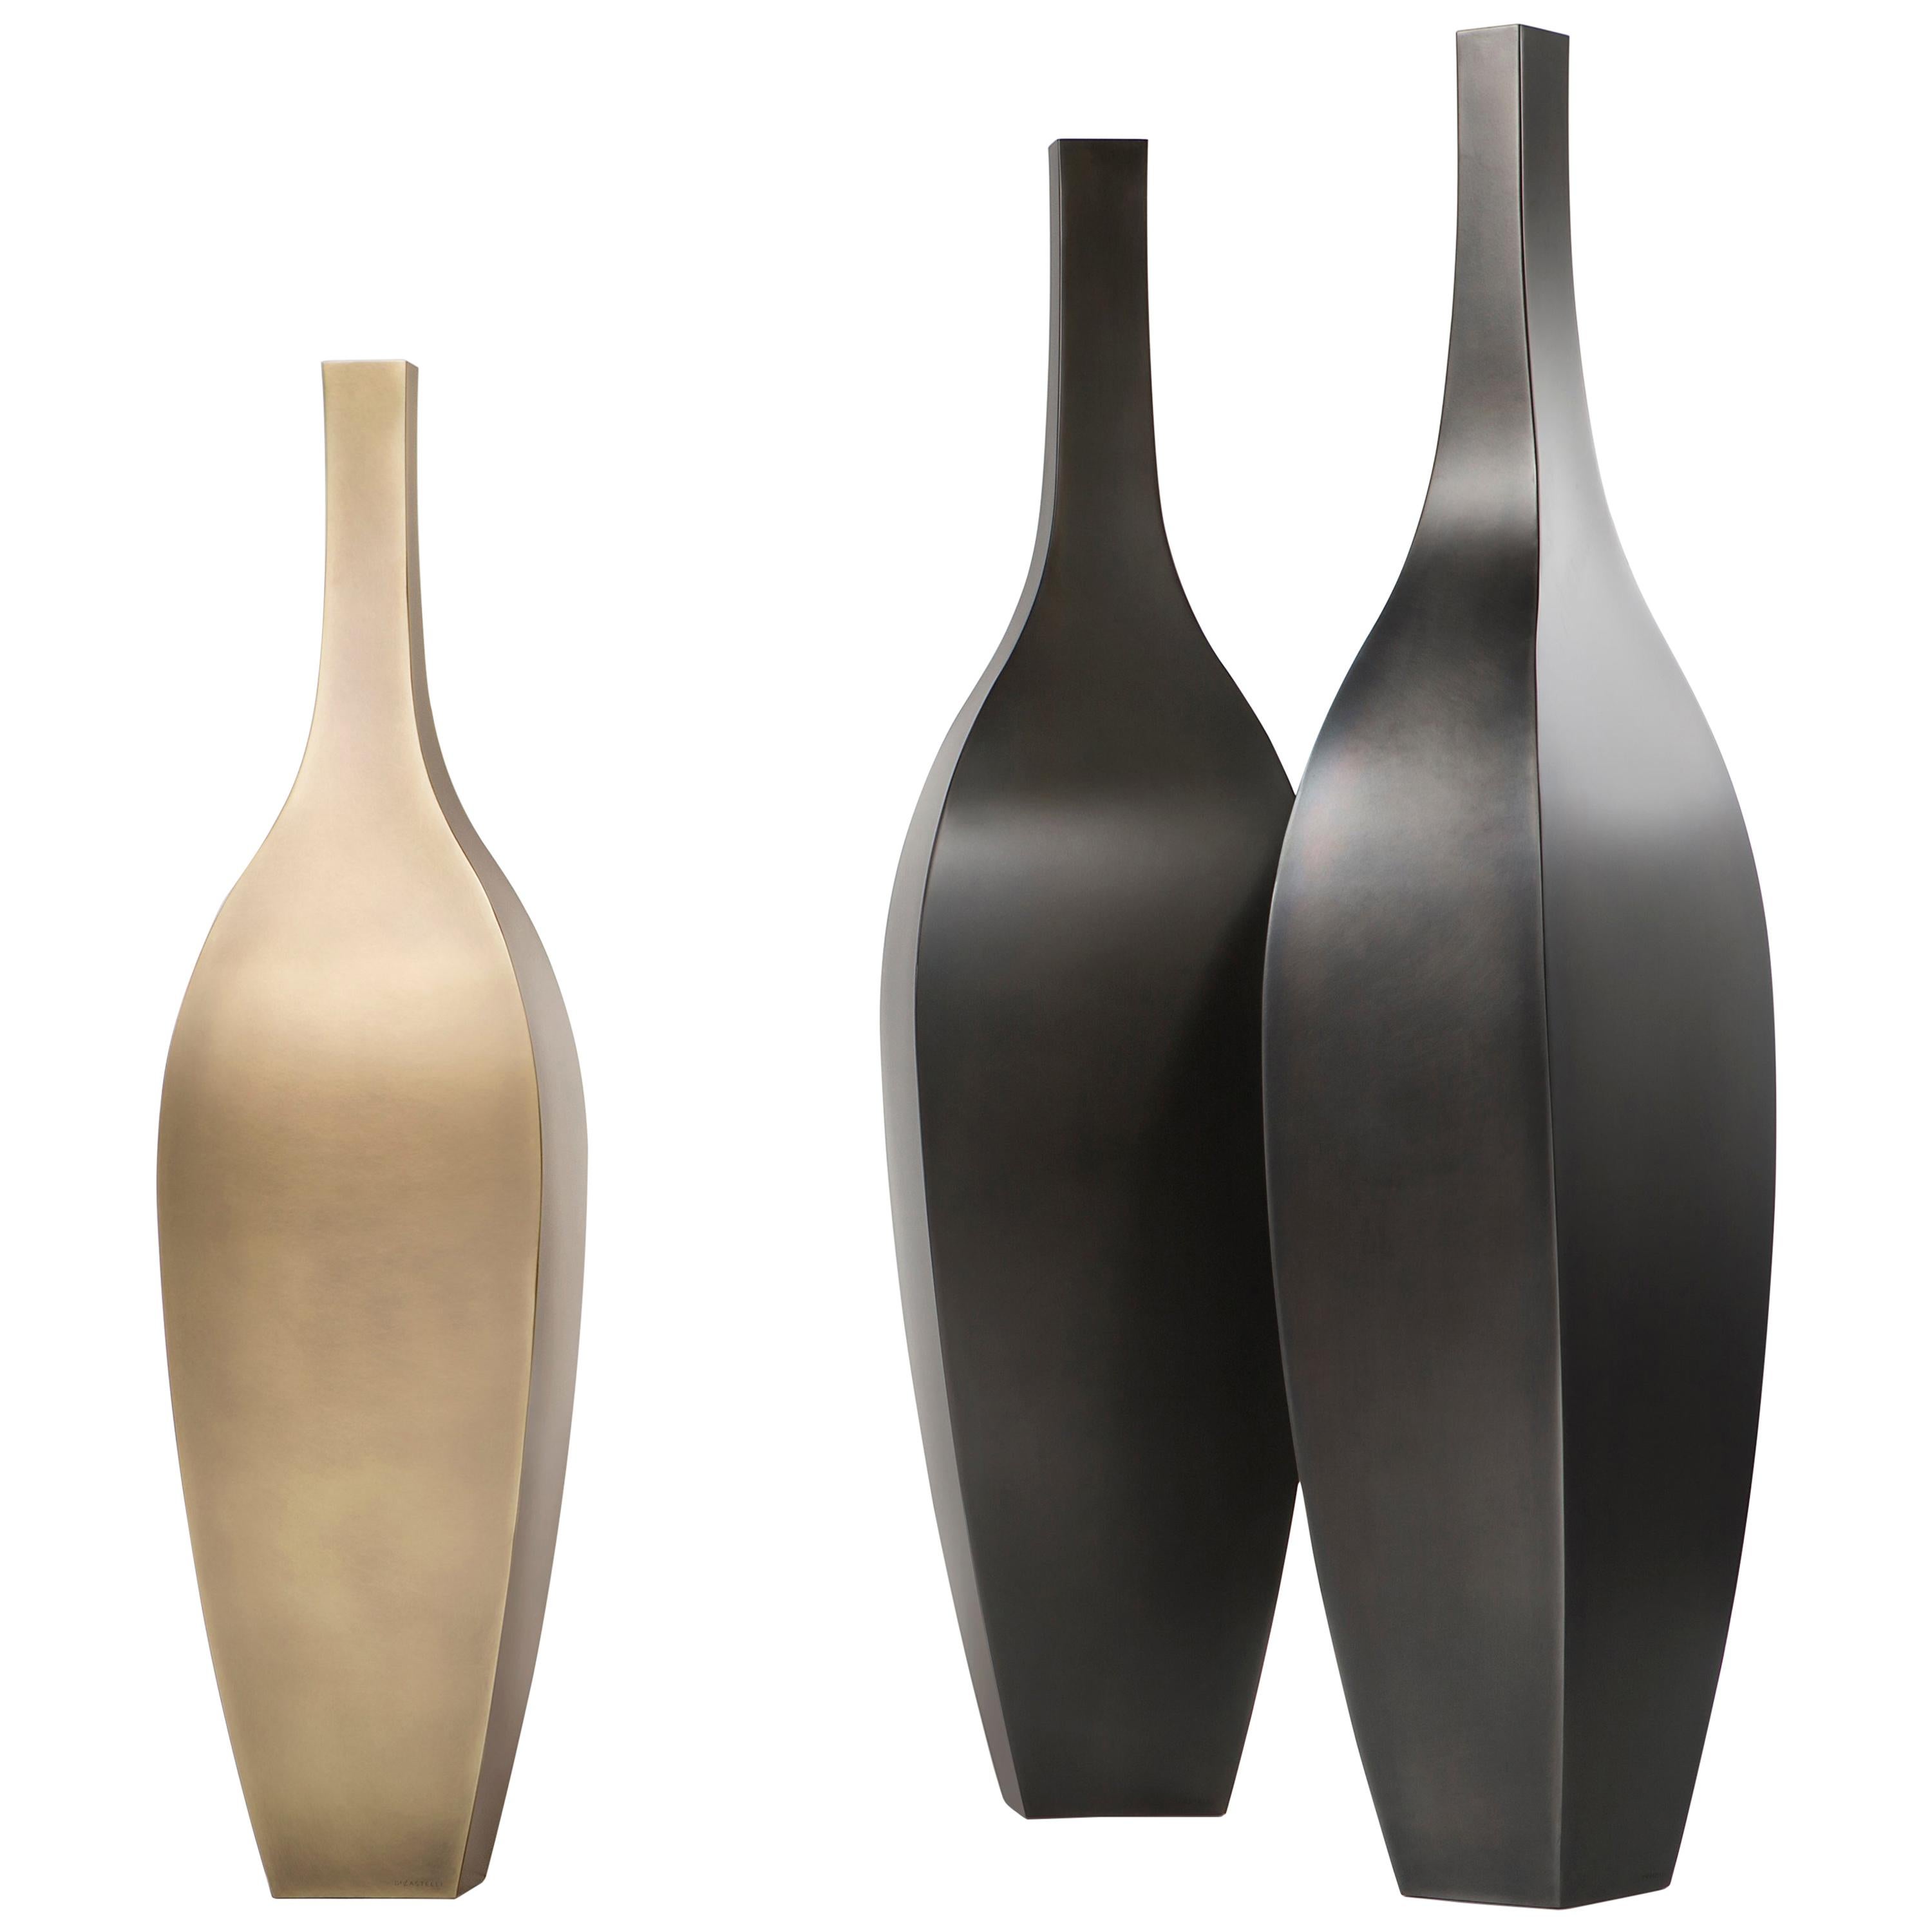 DeCastelli Rocco 175 Vase in Stainless Steel by Stefano Dussin